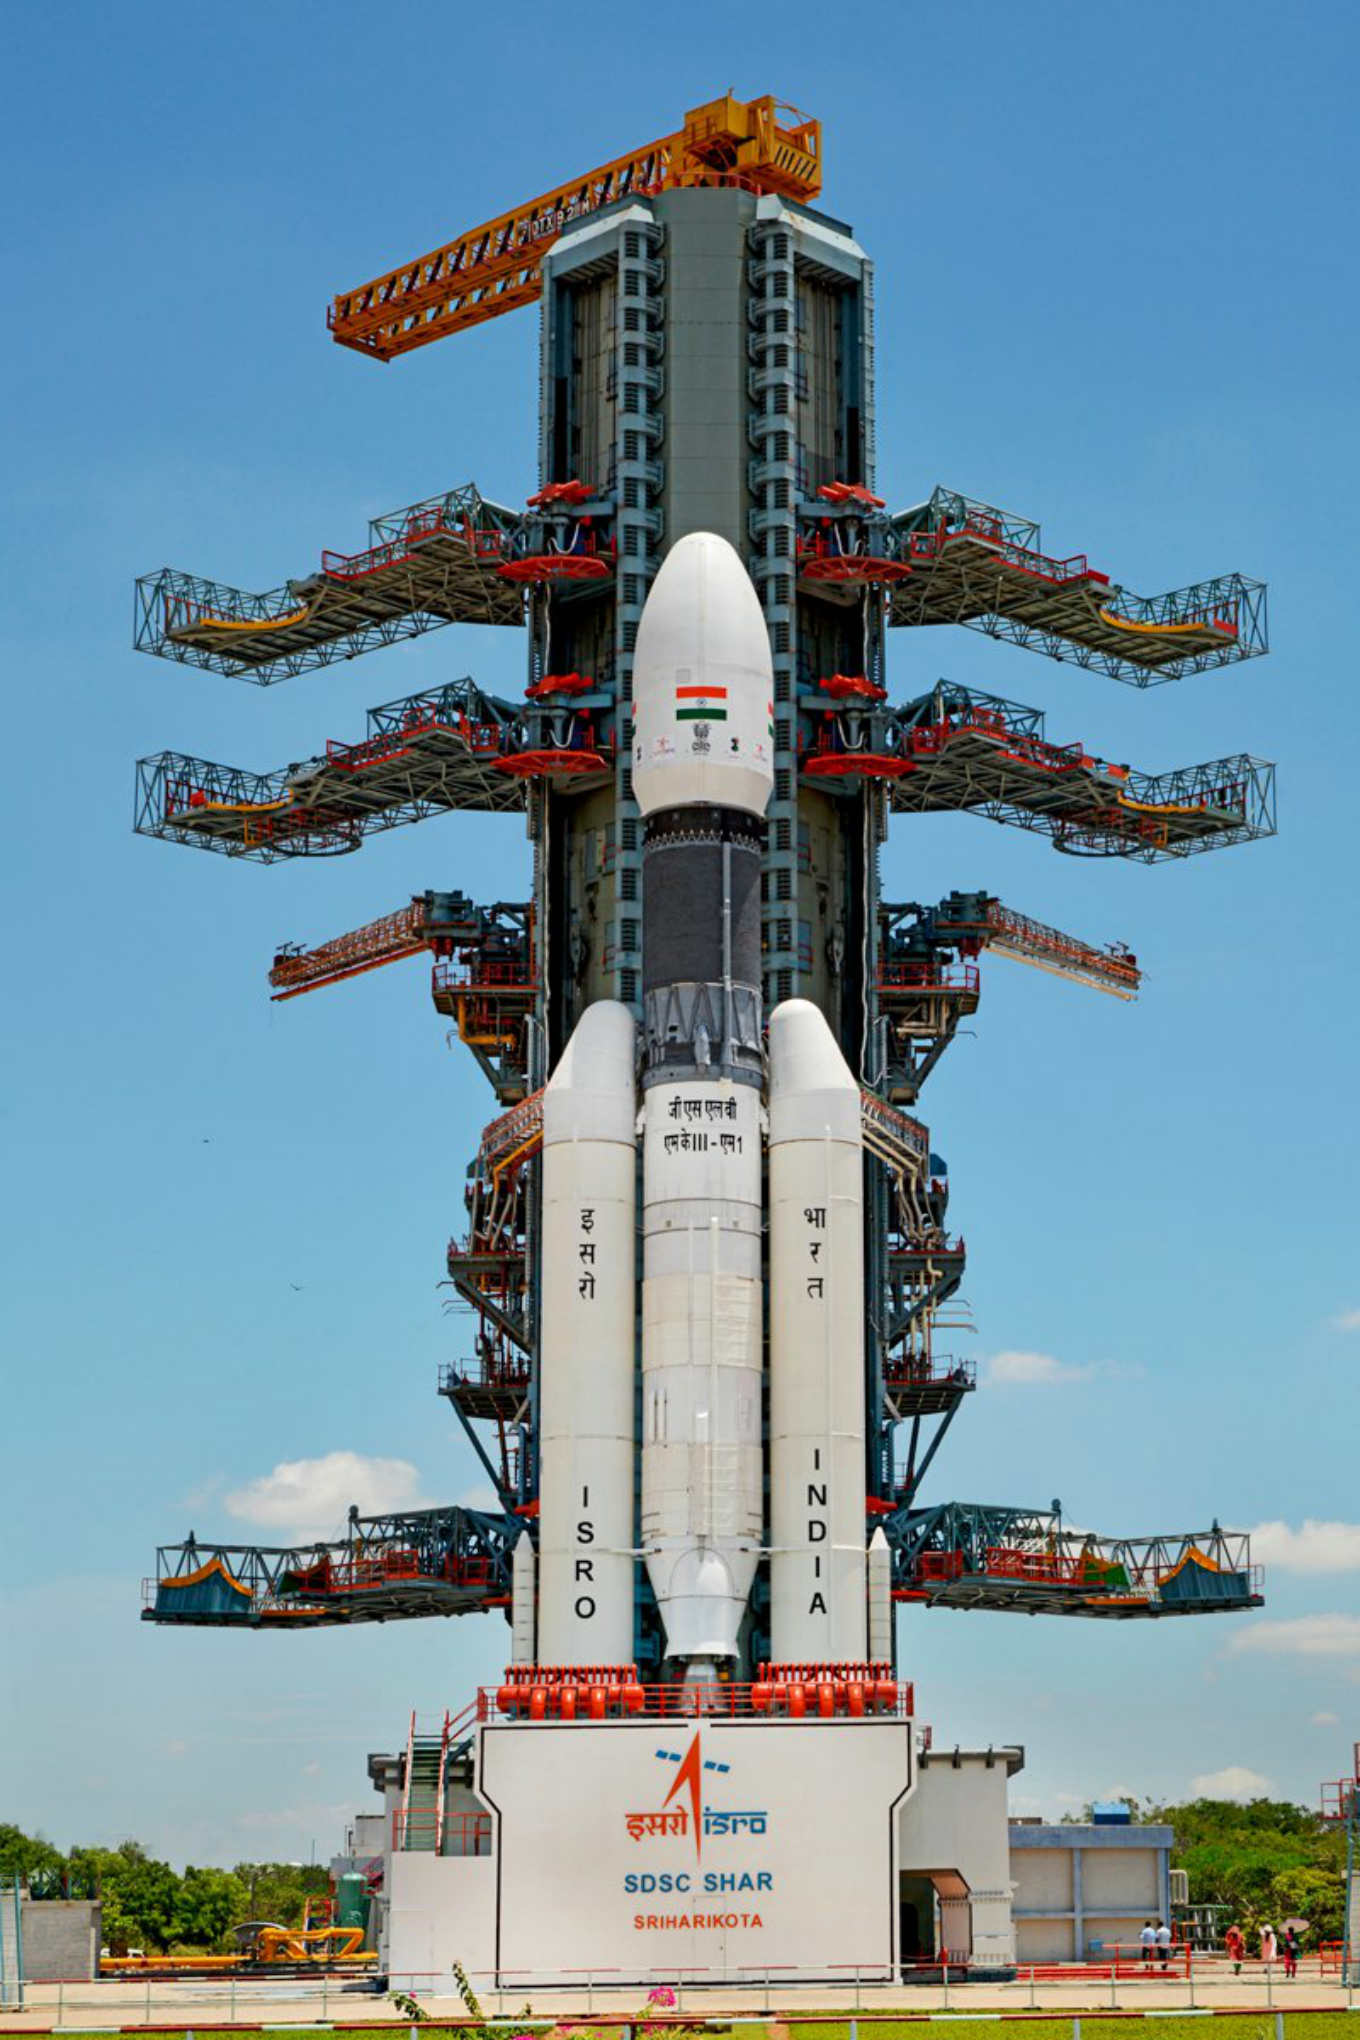 ISRO Launches Its Second Moon Mission— Chandrayaan 2